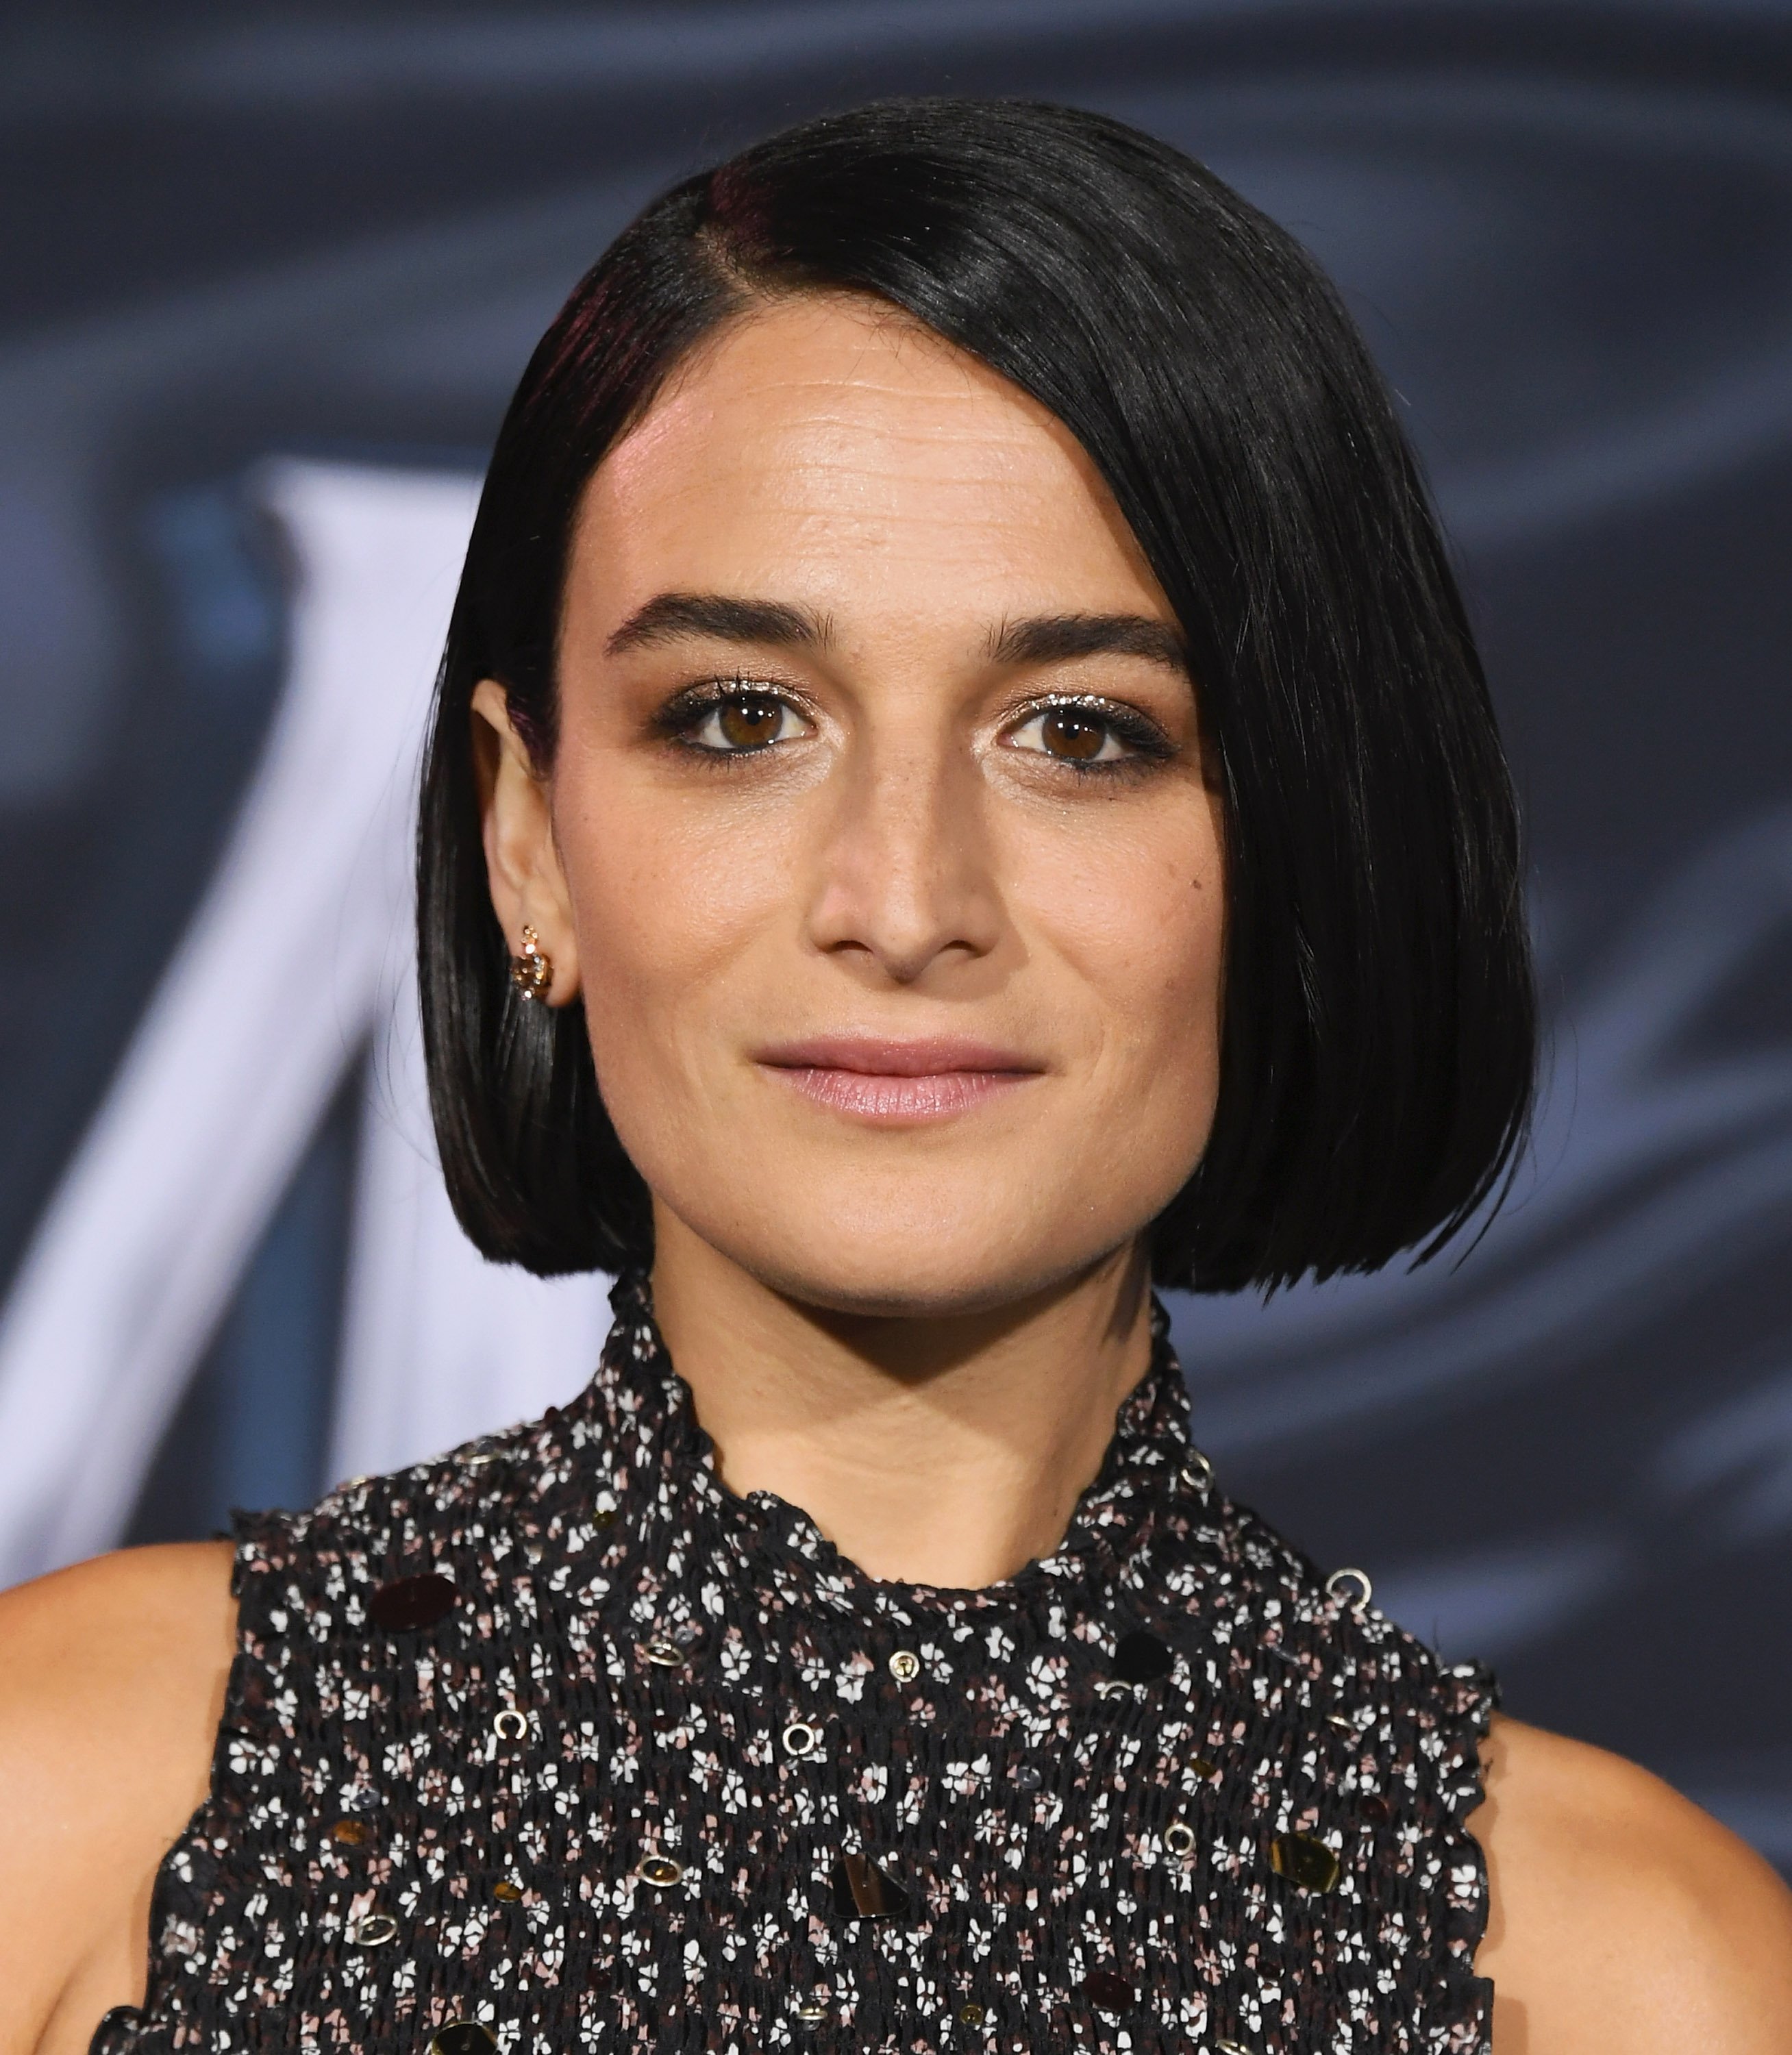 Jenny Slate attending the premiere of "Venom" Source | Photo: Getty Images